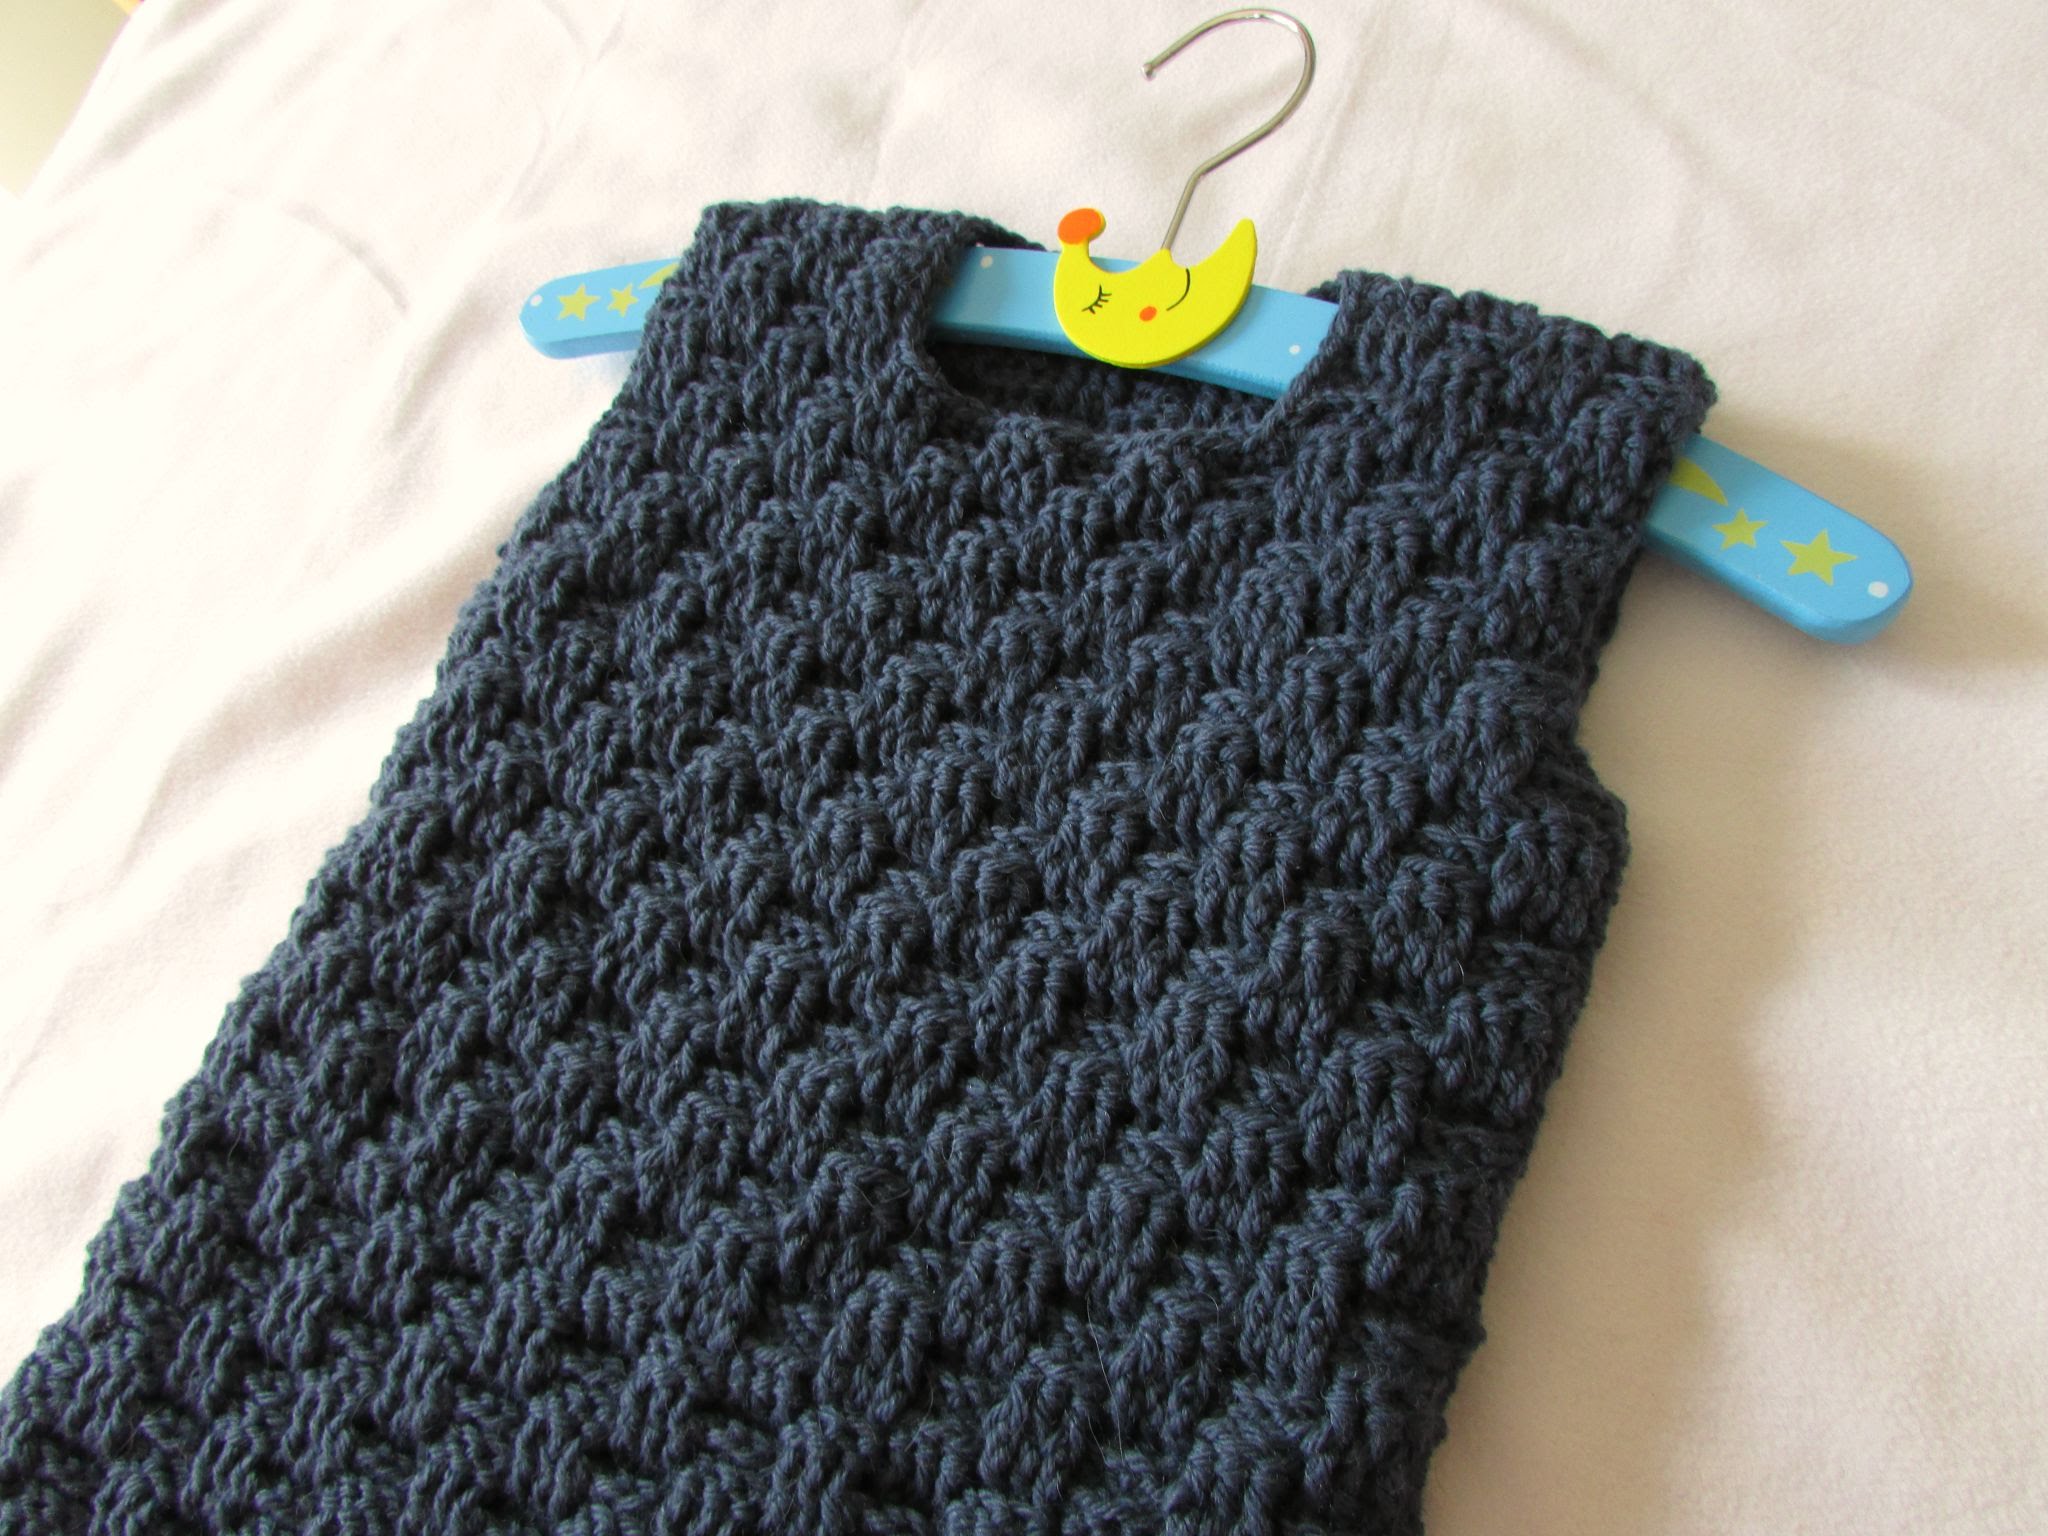 How to crochet an easy cable / basket weave vest - all sizes - YouTube